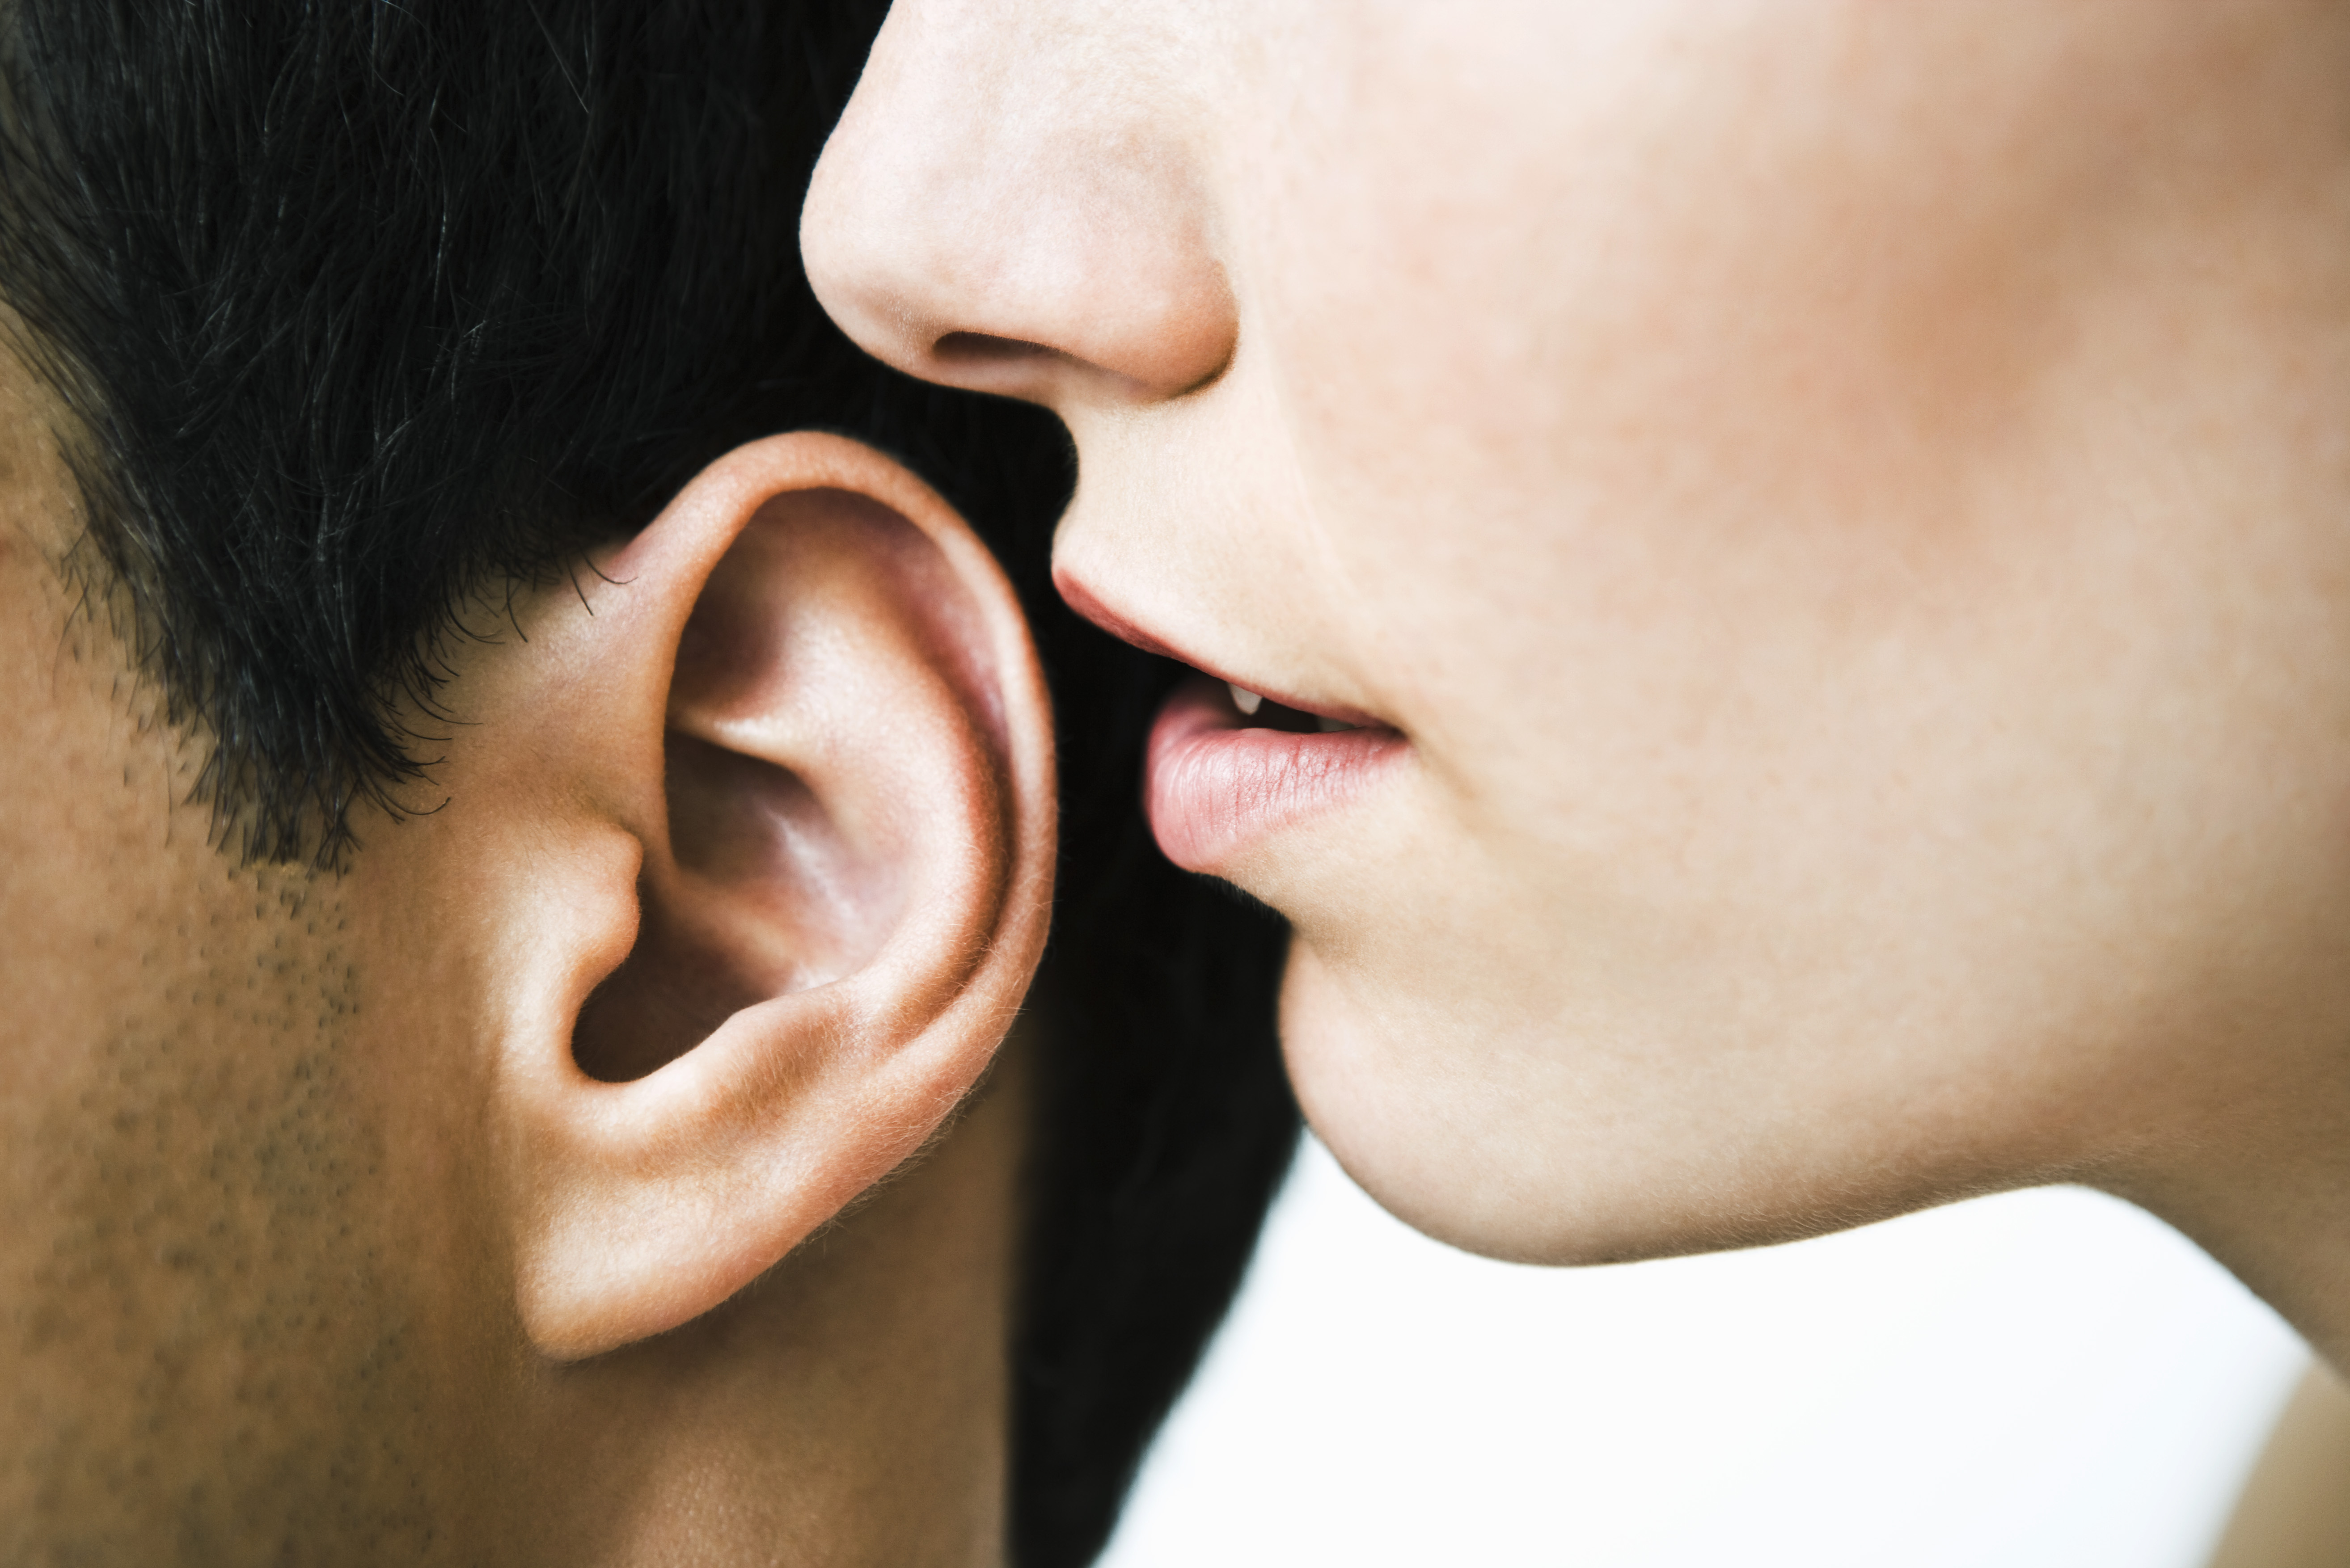 Woman whispering in man's ear, close-up | Source: Getty Images